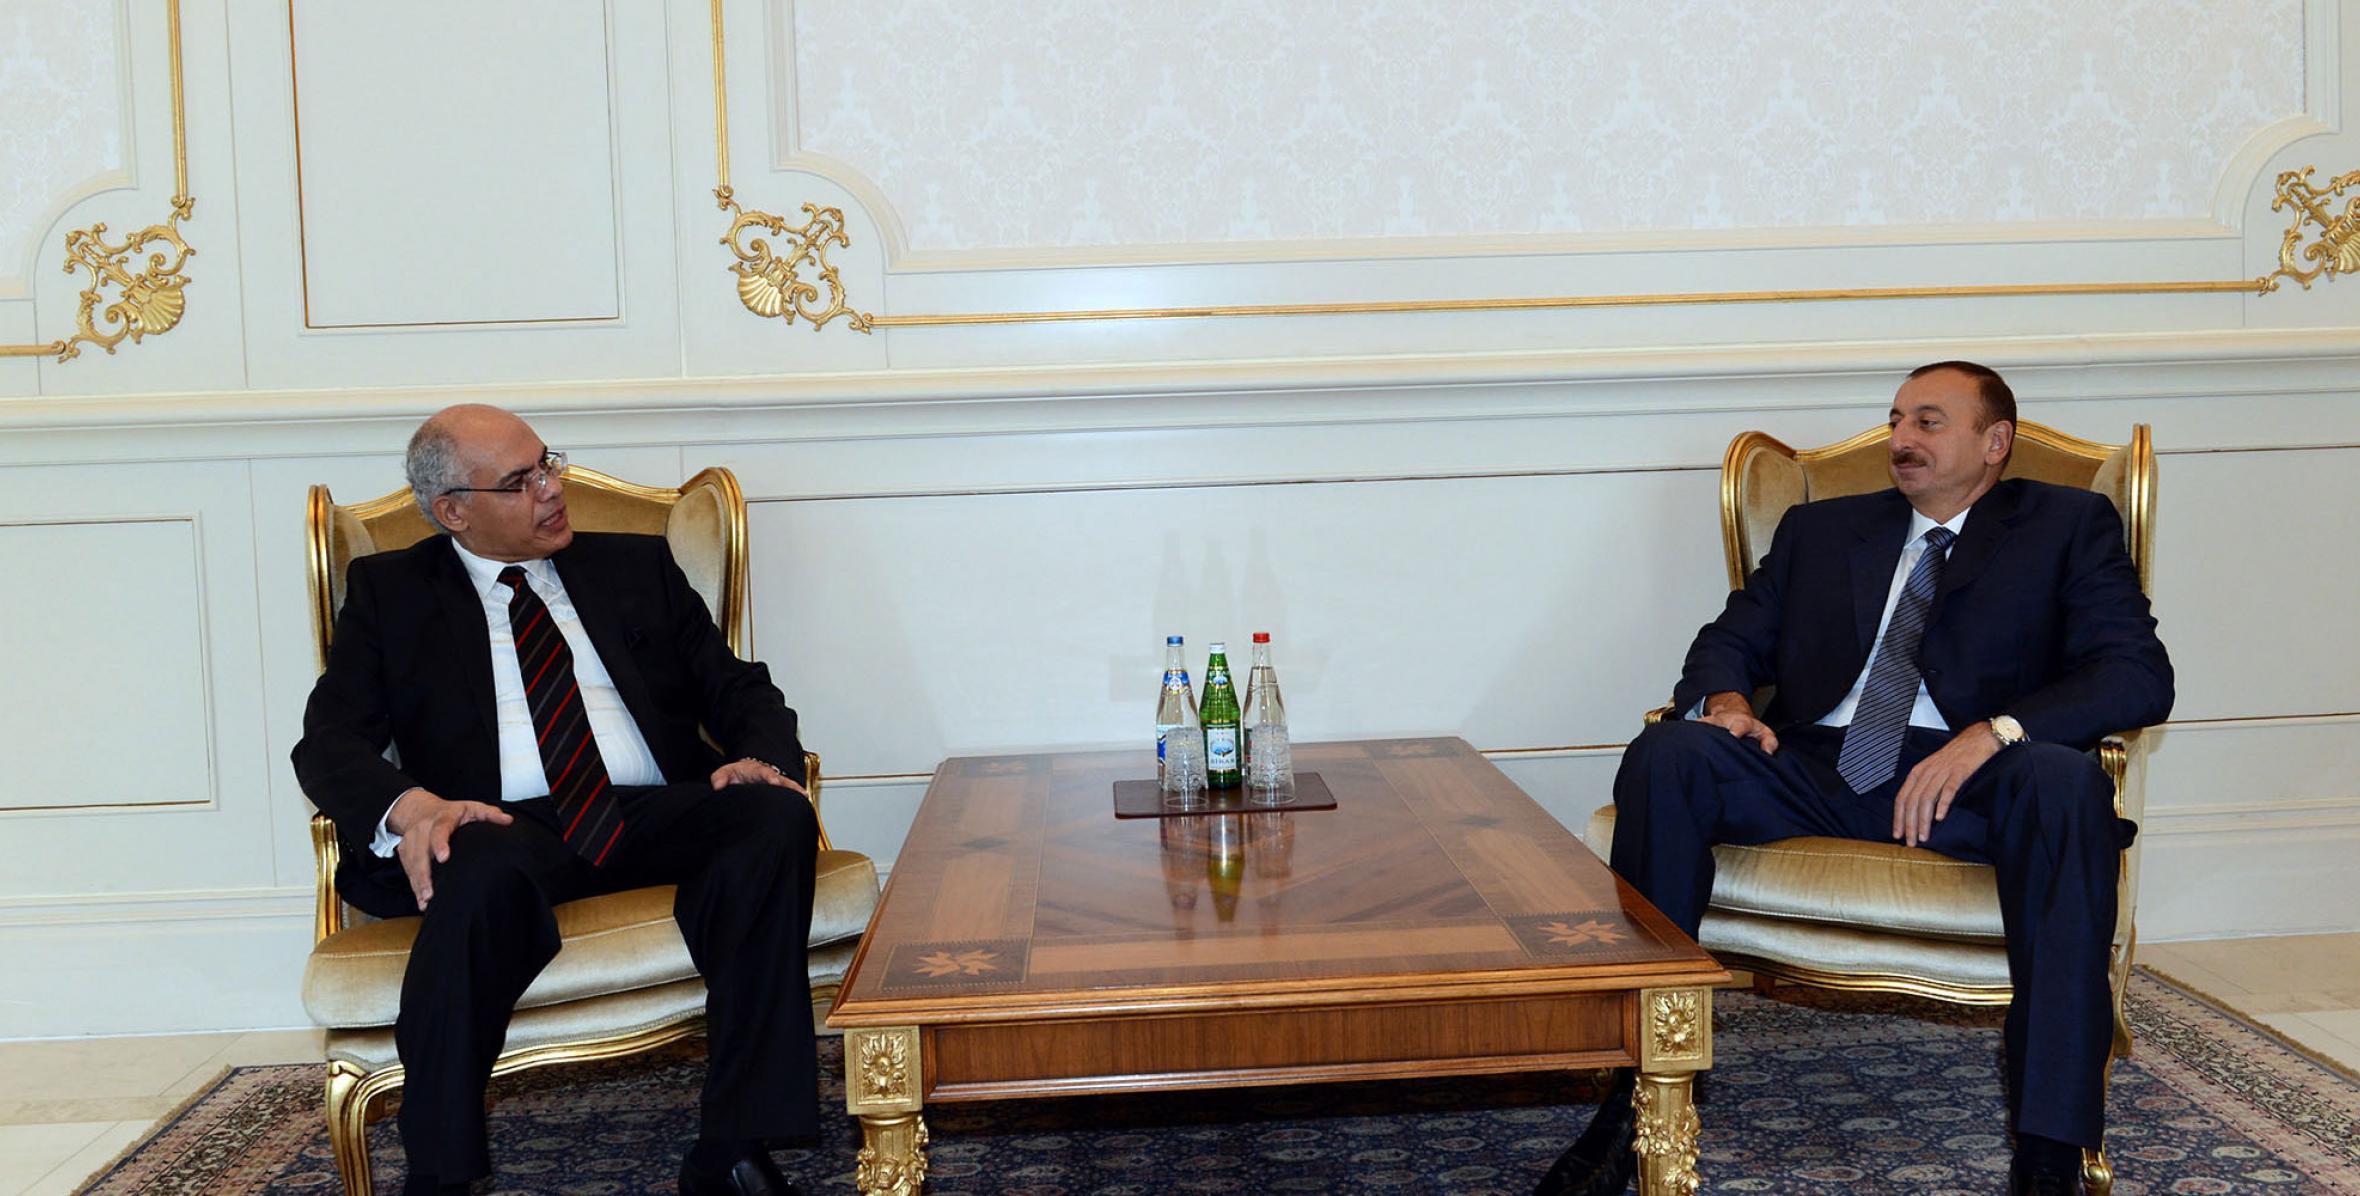 Ilham Aliyev accepted the credentials of a newly-appointed Ambassador Extraordinary and Plenipotentiary of the Arab Republic of Egypt to Azerbaijan